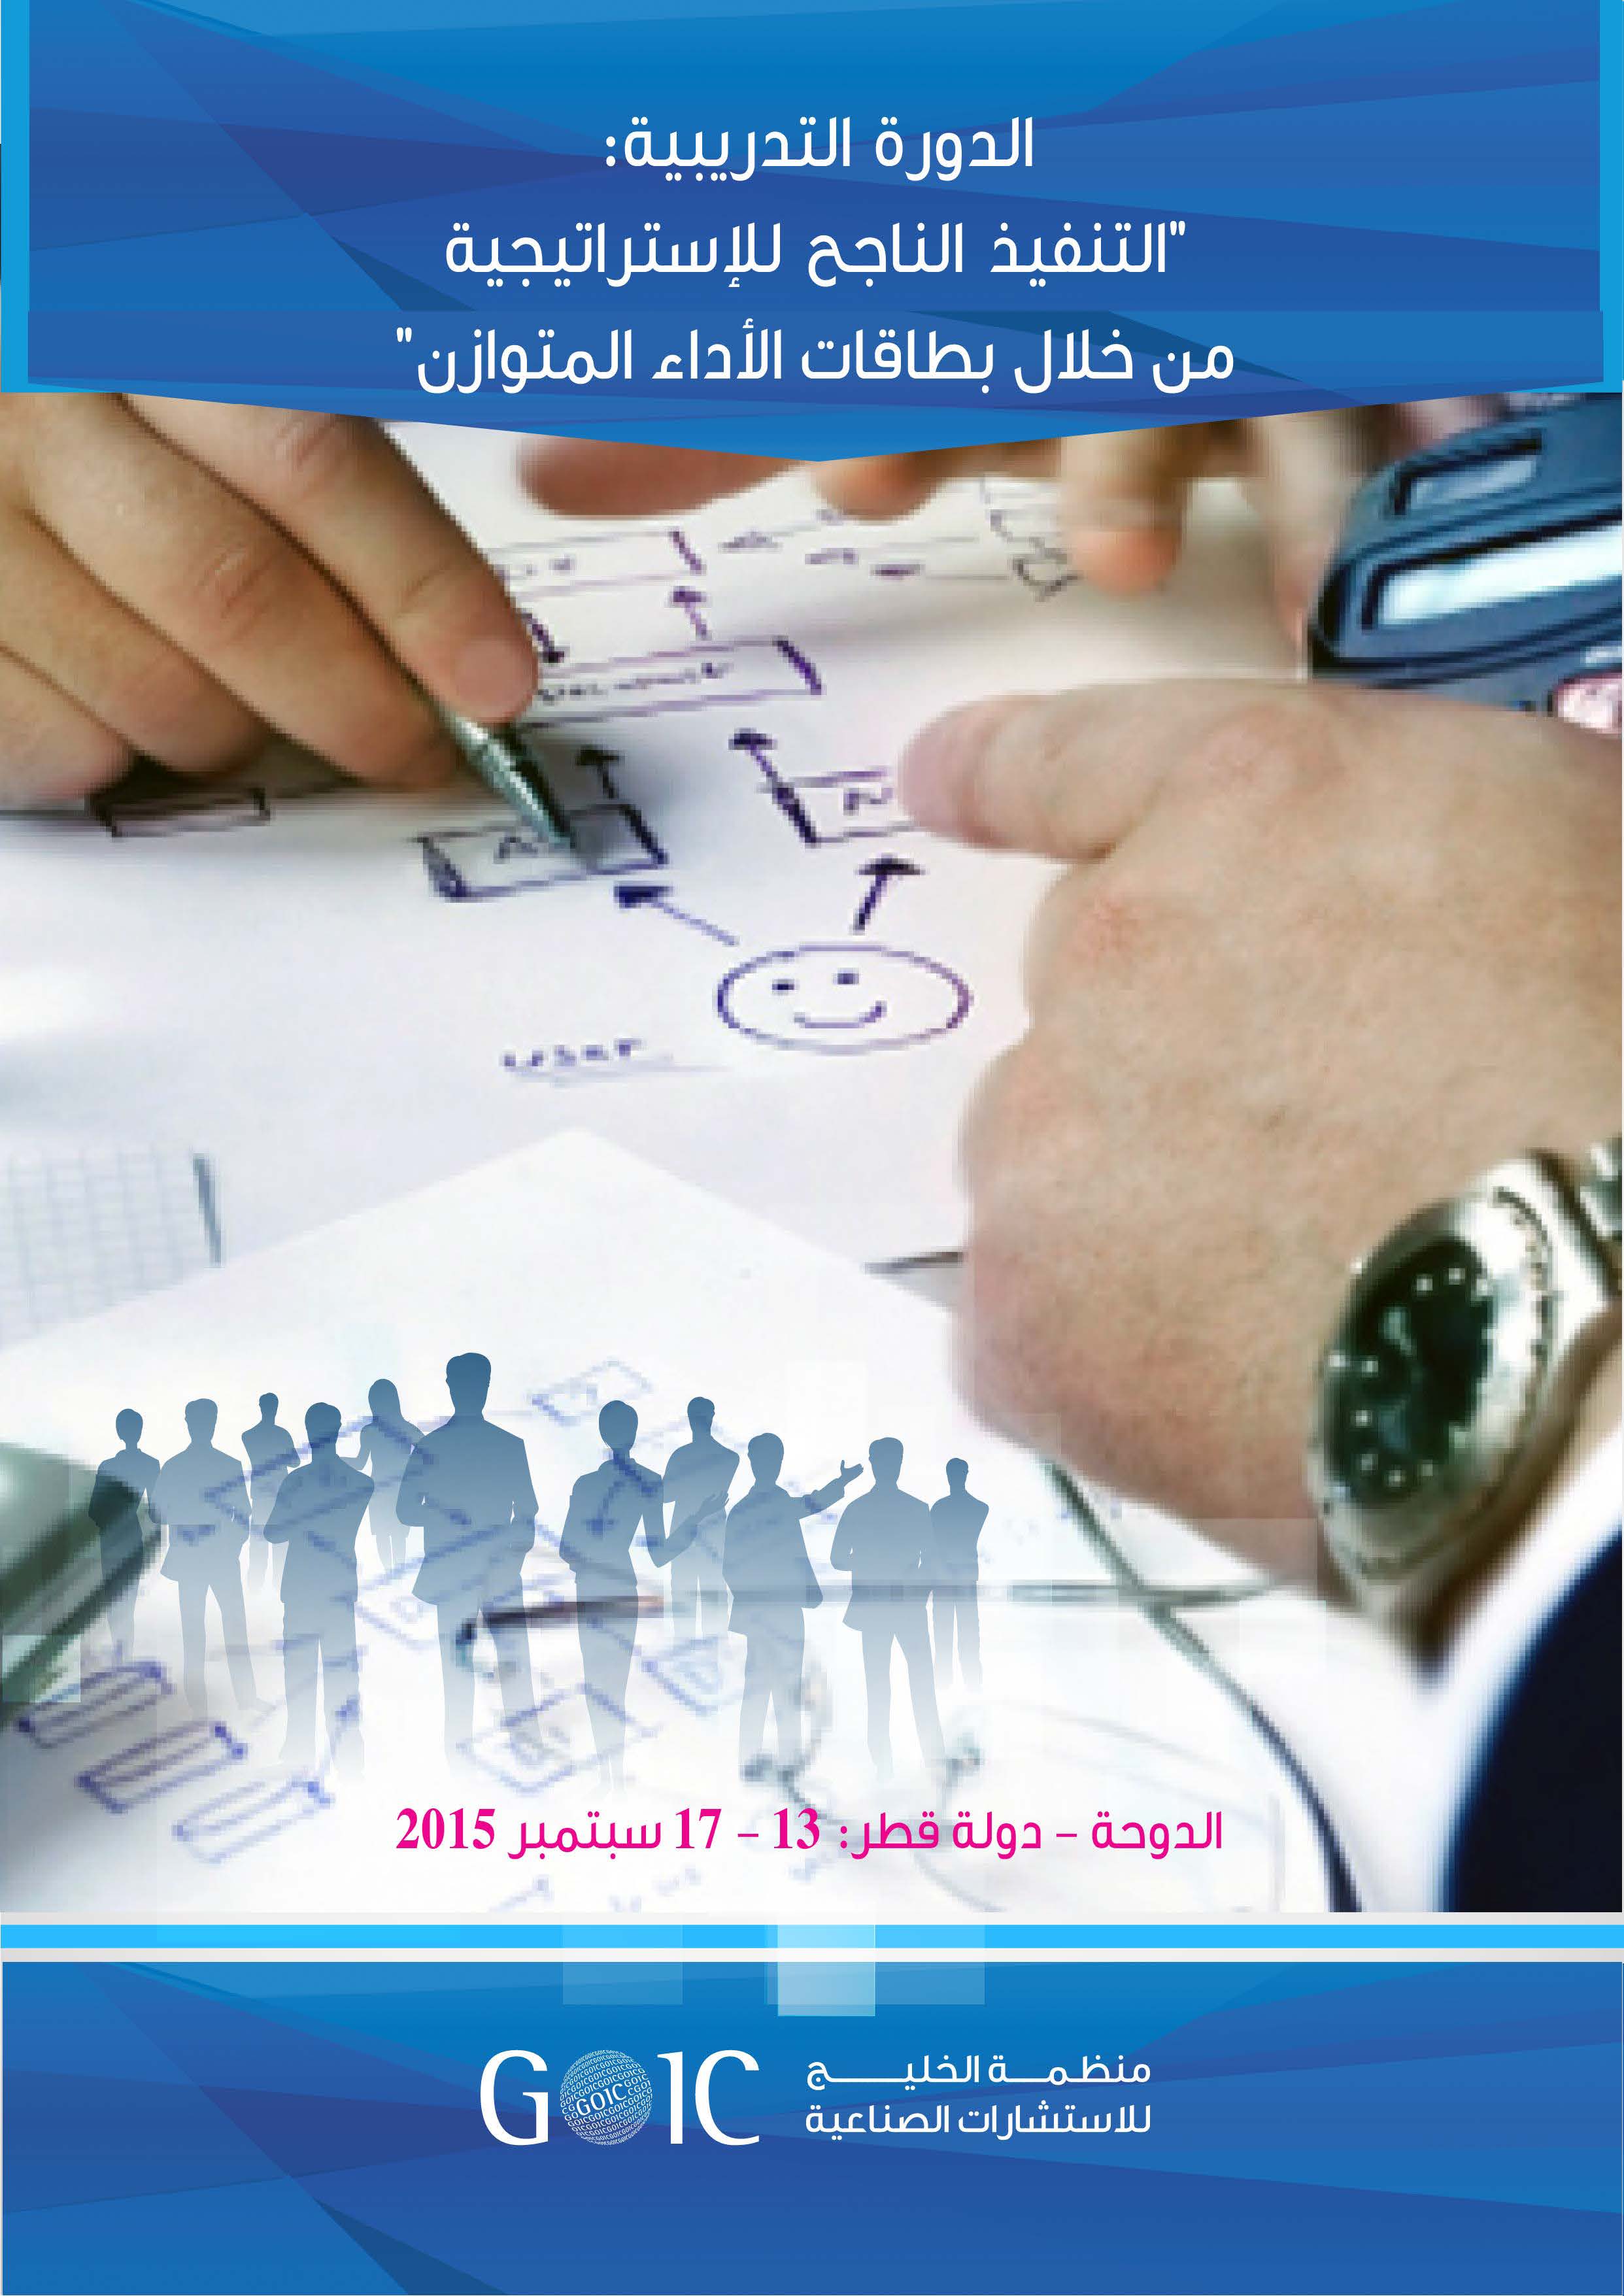 GOIC organises a training entitled “Balanced scorecards (BSCs) for a successful execution of the strategy”